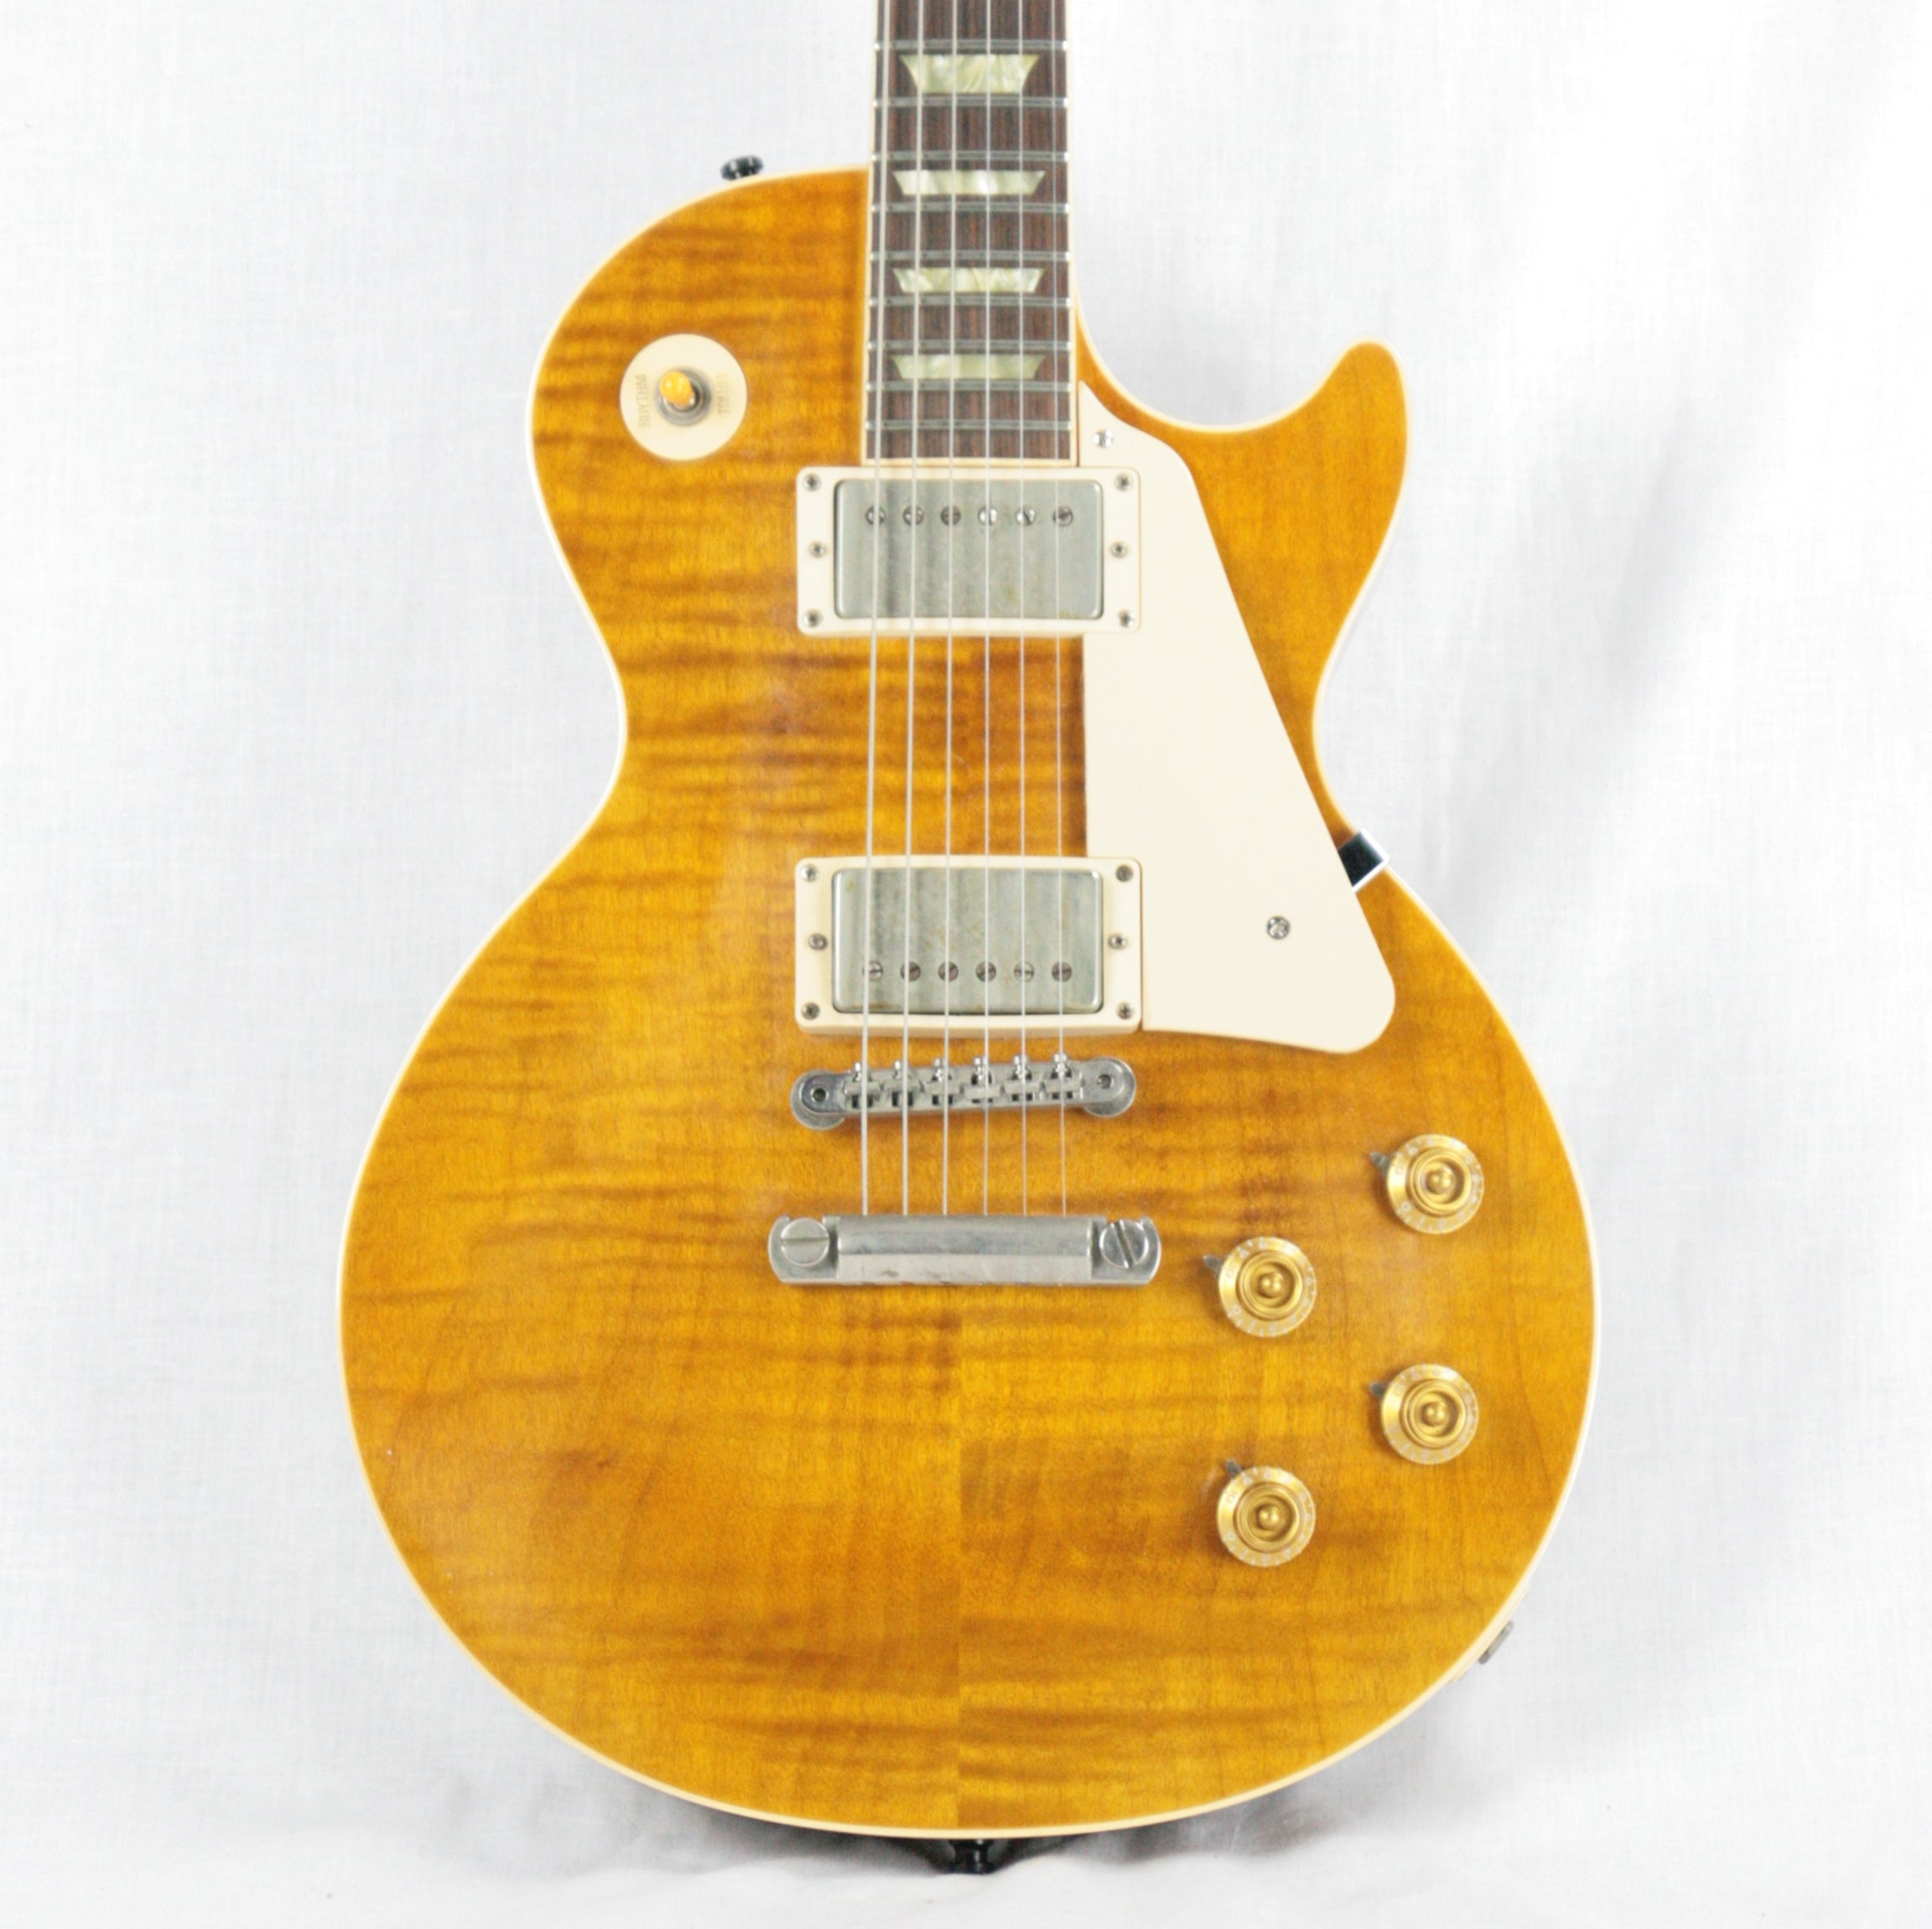 *SOLD*  1995 Gibson Les Paul Classic Plus Flametop! Amber 1960 Reissue Standard! 60